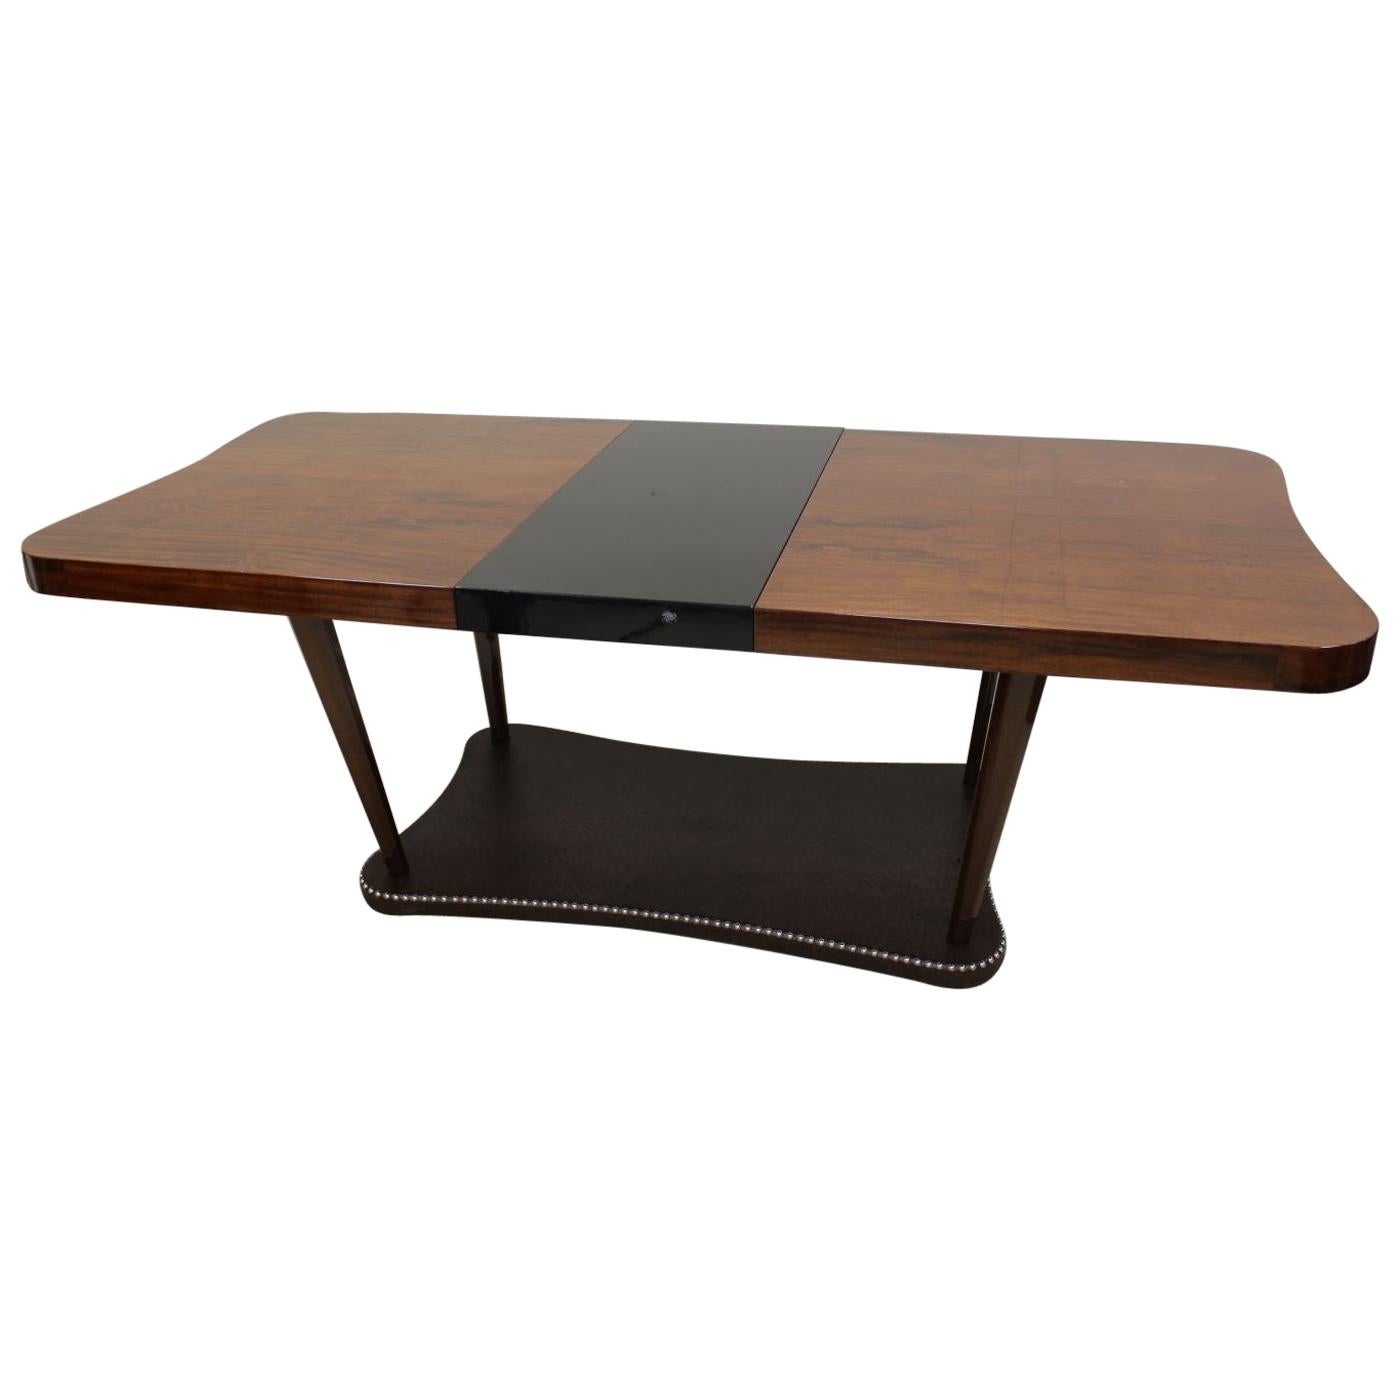 Gilbert Rohde Art Deco Paldao Dining Table for Herman Miller